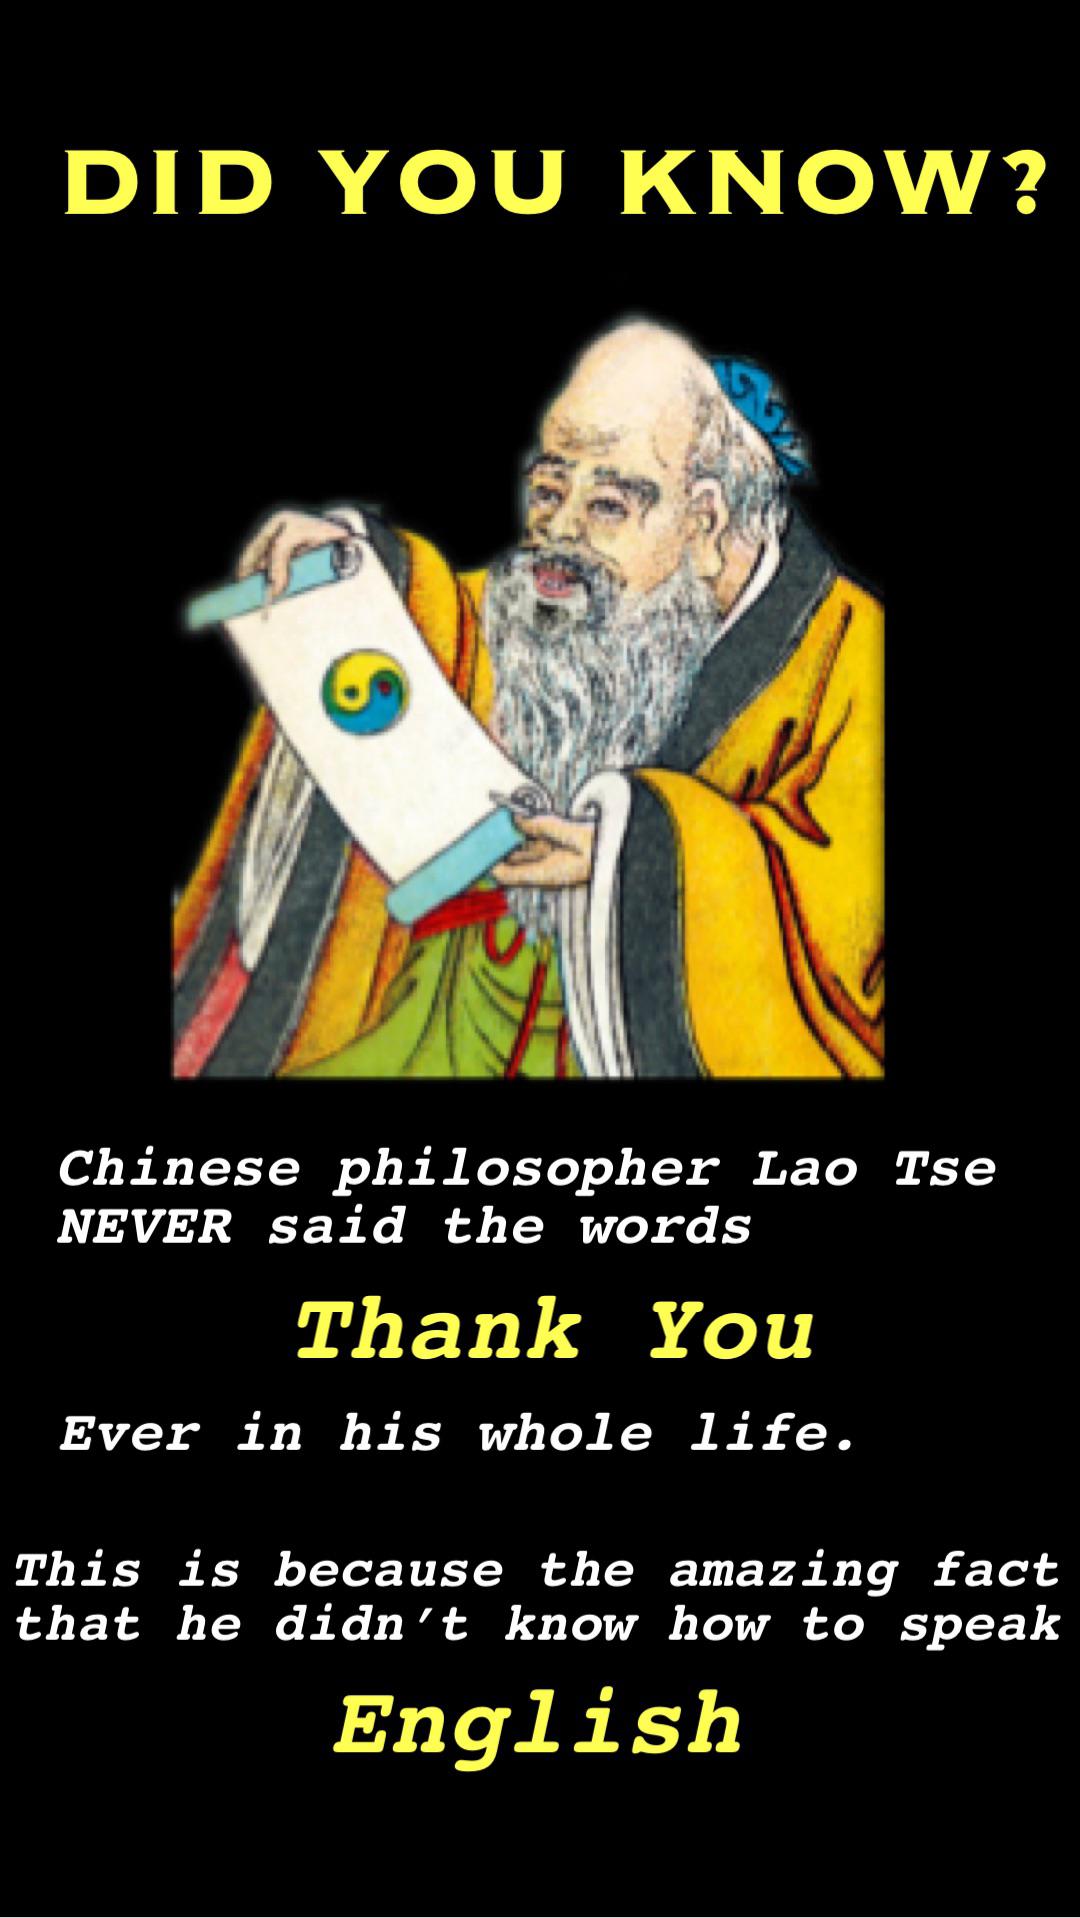 religion - Did You Know? Chinese philosopher Lao Tse Never said the words Thank You Ever in his whole life. This is because the amazing fact that he didn't know how to speak English